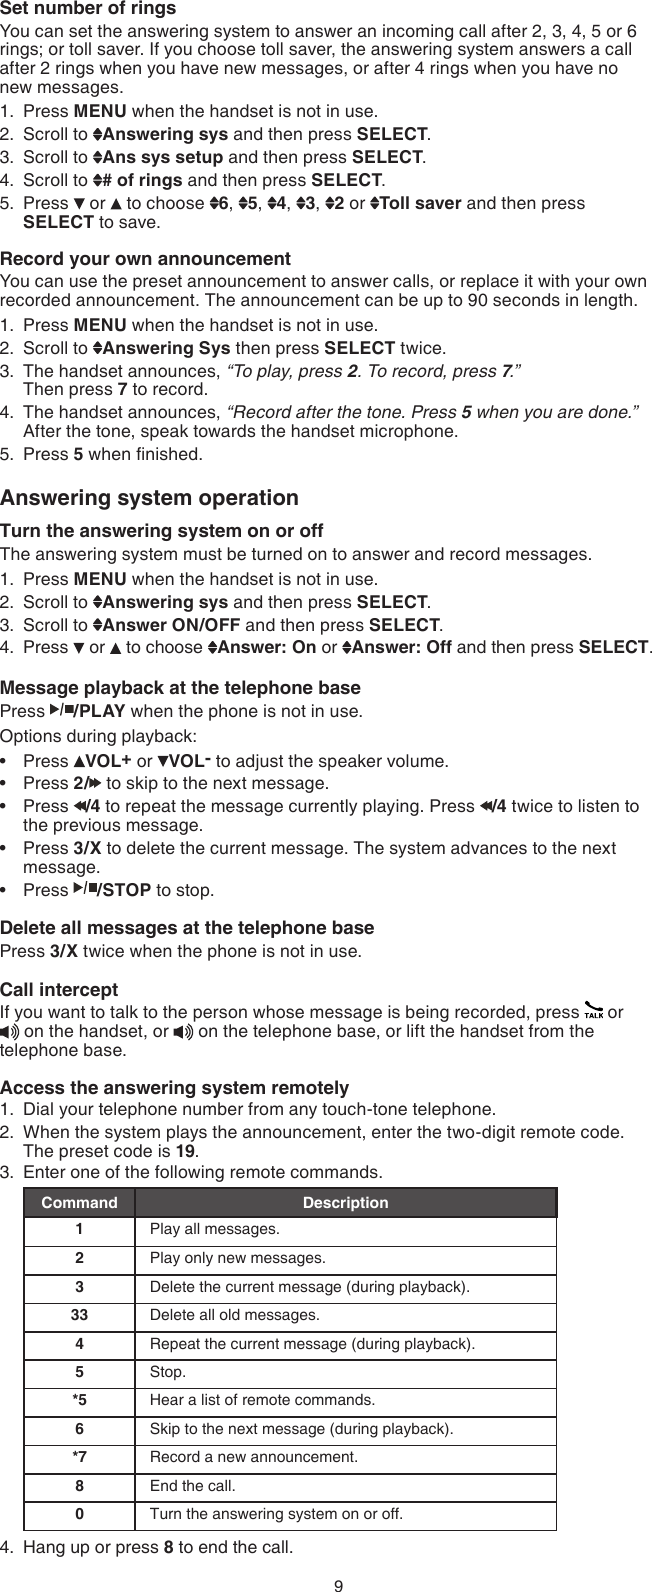 9Set number of ringsYou can set the answering system to answer an incoming call after 2, 3, 4, 5 or 6 rings; or toll saver. If you choose toll saver, the answering system answers a call after 2 rings when you have new messages, or after 4 rings when you have no  new messages.Press MENU when the handset is not in use.Scroll to  Answering sys and then press SELECT.Scroll to  Ans sys setup and then press SELECT.Scroll to  # of rings and then press SELECT.Press   or   to choose  6,  5,  4,  3,  2 or  Toll saver and then press SELECT to save. Record your own announcementYou can use the preset announcement to answer calls, or replace it with your own recorded announcement. The announcement can be up to 90 seconds in length.Press MENU when the handset is not in use.Scroll to  Answering Sys then press SELECT twice.The handset announces, “To play, press 2. To record, press 7.”   Then press 7 to record.The handset announces, “Record after the tone. Press 5 when you are done.” After the tone, speak towards the handset microphone.Press 5 when nished.Answering system operationTurn the answering system on or offThe answering system must be turned on to answer and record messages. Press MENU when the handset is not in use.Scroll to  Answering sys and then press SELECT.Scroll to  Answer ON/OFF and then press SELECT.Press   or   to choose  Answer: On or  Answer: Off and then press SELECT.Message playback at the telephone base Press  /PLAY when the phone is not in use.Options during playback:Press  VOL+ or  VOL- to adjust the speaker volume.Press 2/  to skip to the next message.Press  /4 to repeat the message currently playing. Press  /4 twice to listen to the previous message.Press 3/X to delete the current message. The system advances to the next message.Press  /STOP to stop.Delete all messages at the telephone basePress 3/X twice when the phone is not in use.Call interceptIf you want to talk to the person whose message is being recorded, press   or   on the handset, or   on the telephone base, or lift the handset from the telephone base.Access the answering system remotelyDial your telephone number from any touch-tone telephone.When the system plays the announcement, enter the two-digit remote code. The preset code is 19.Enter one of the following remote commands.Command Description1Play all messages.2Play only new messages.3Delete the current message (during playback).33 Delete all old messages.4Repeat the current message (during playback).5Stop.*5 Hear a list of remote commands.6Skip to the next message (during playback).*7 Record a new announcement.8End the call.0Turn the answering system on or off.Hang up or press 8 to end the call.1.2.3.4.5.1.2.3.4.5.1.2.3.4.•••••1.2.3.4.